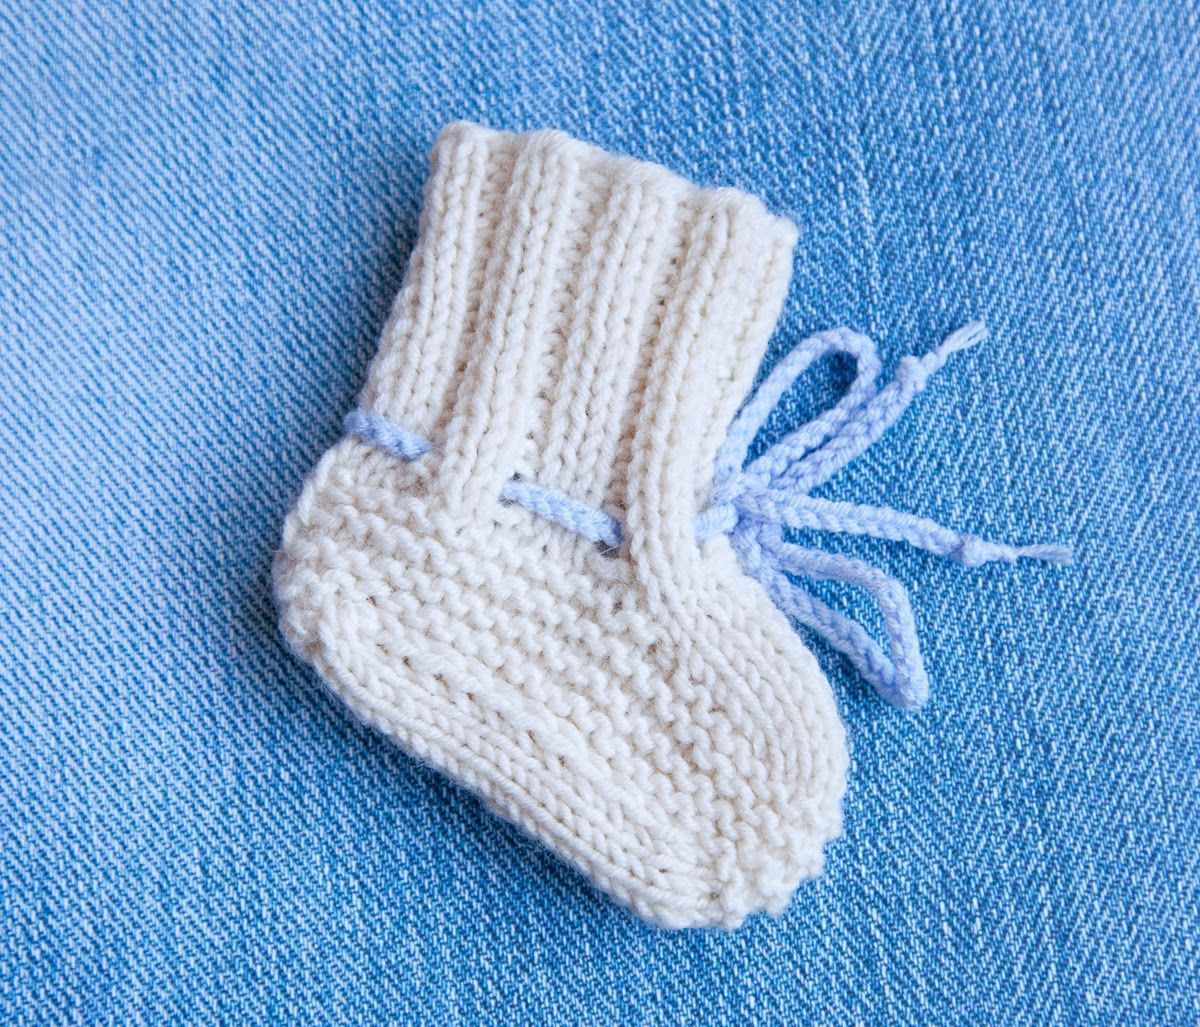 Basic Baby Booties Knitting Pattern Topic For Directions For Knit Ba Booties Crochet Plaid Cuff Ba